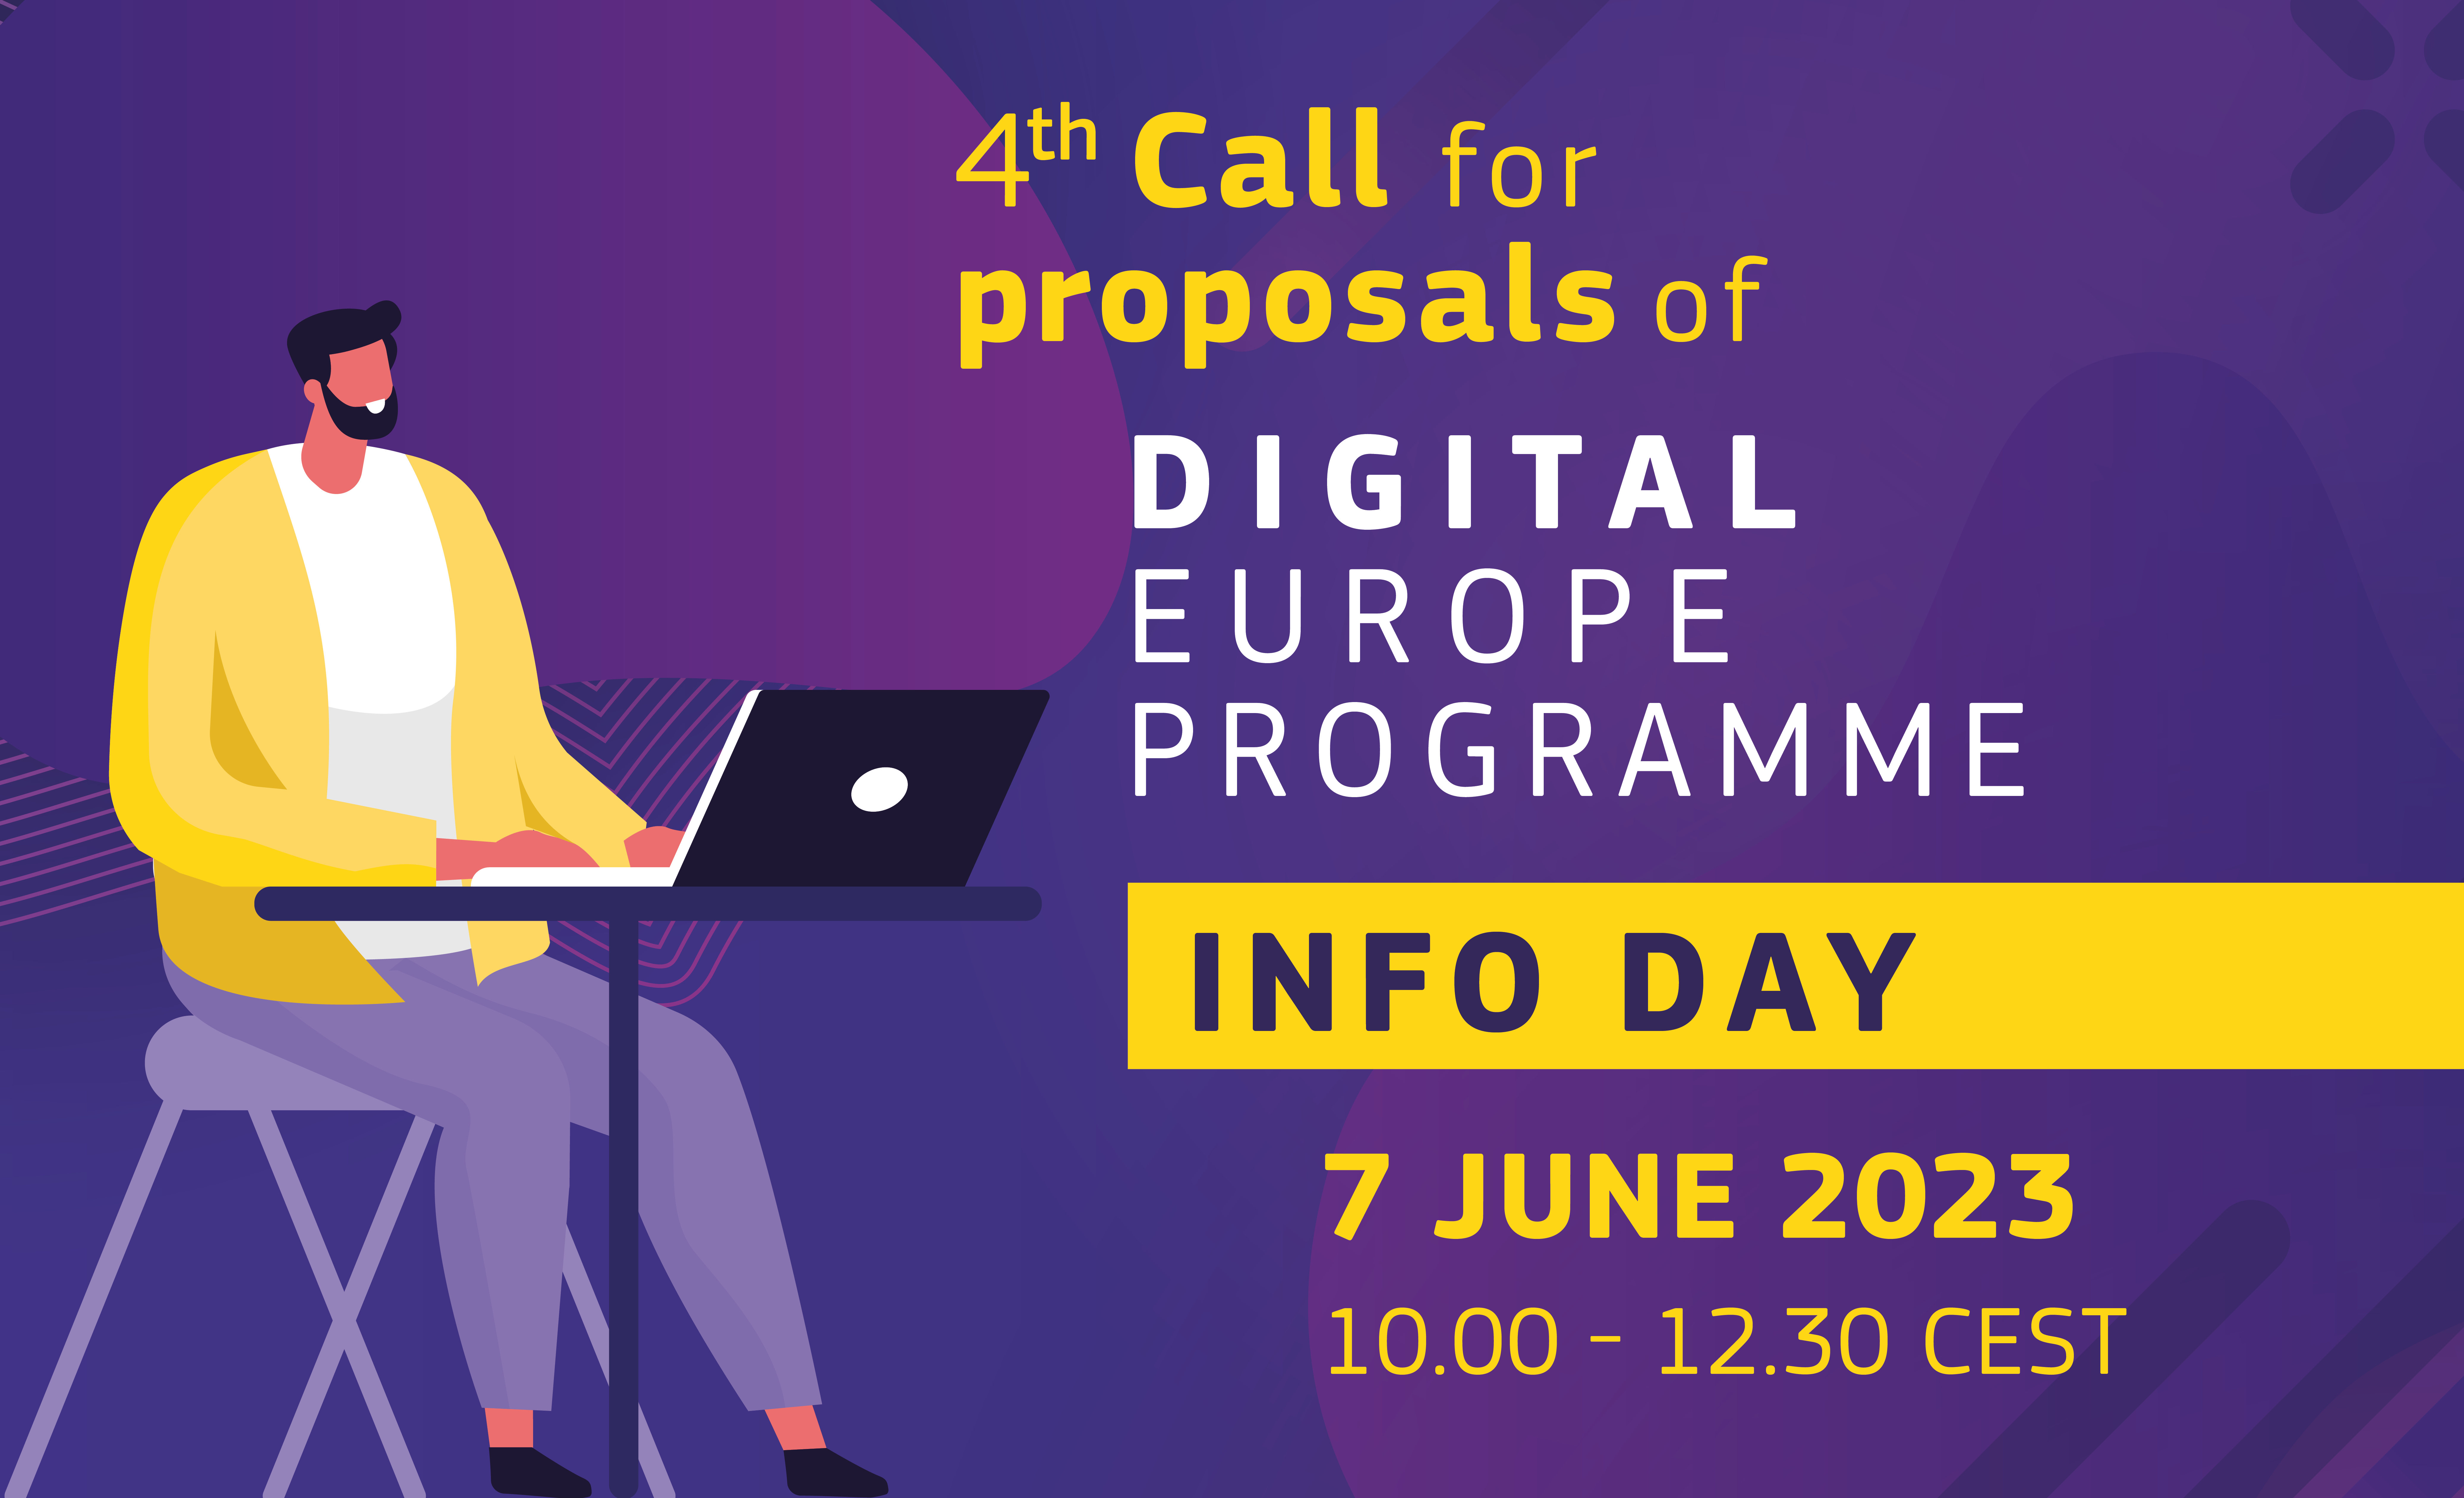 Join our Info Day on 7 June at 10:00 (CEST) - 4th call for proposals under the Digital Europe Programme